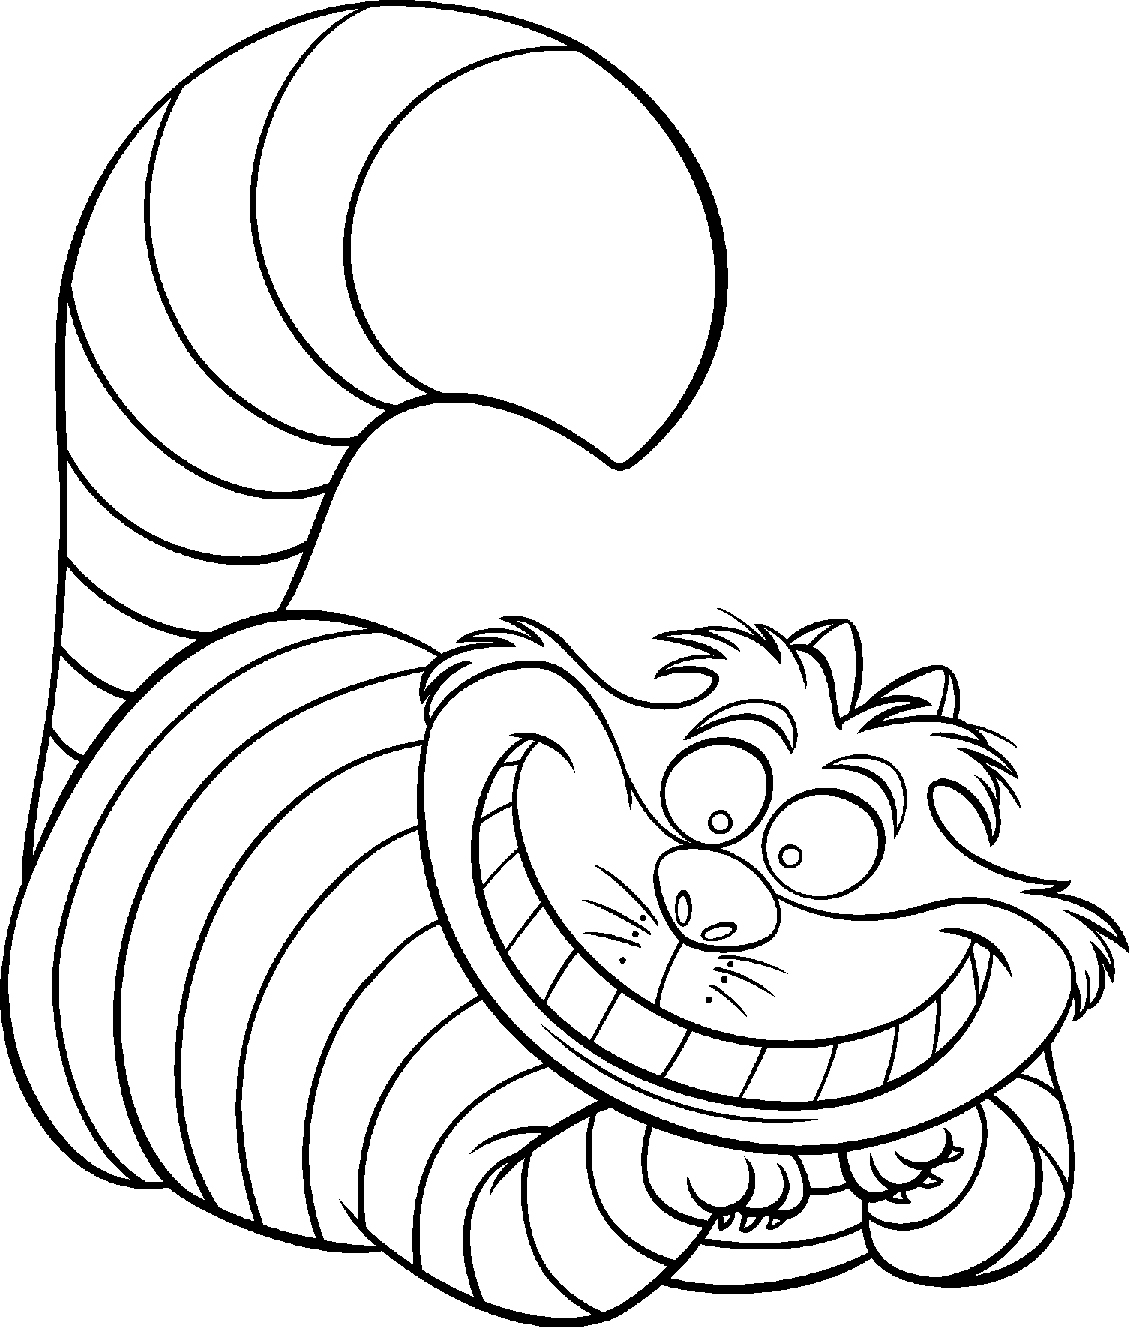 Disney coloring pages alice in wonderland colouring pictures